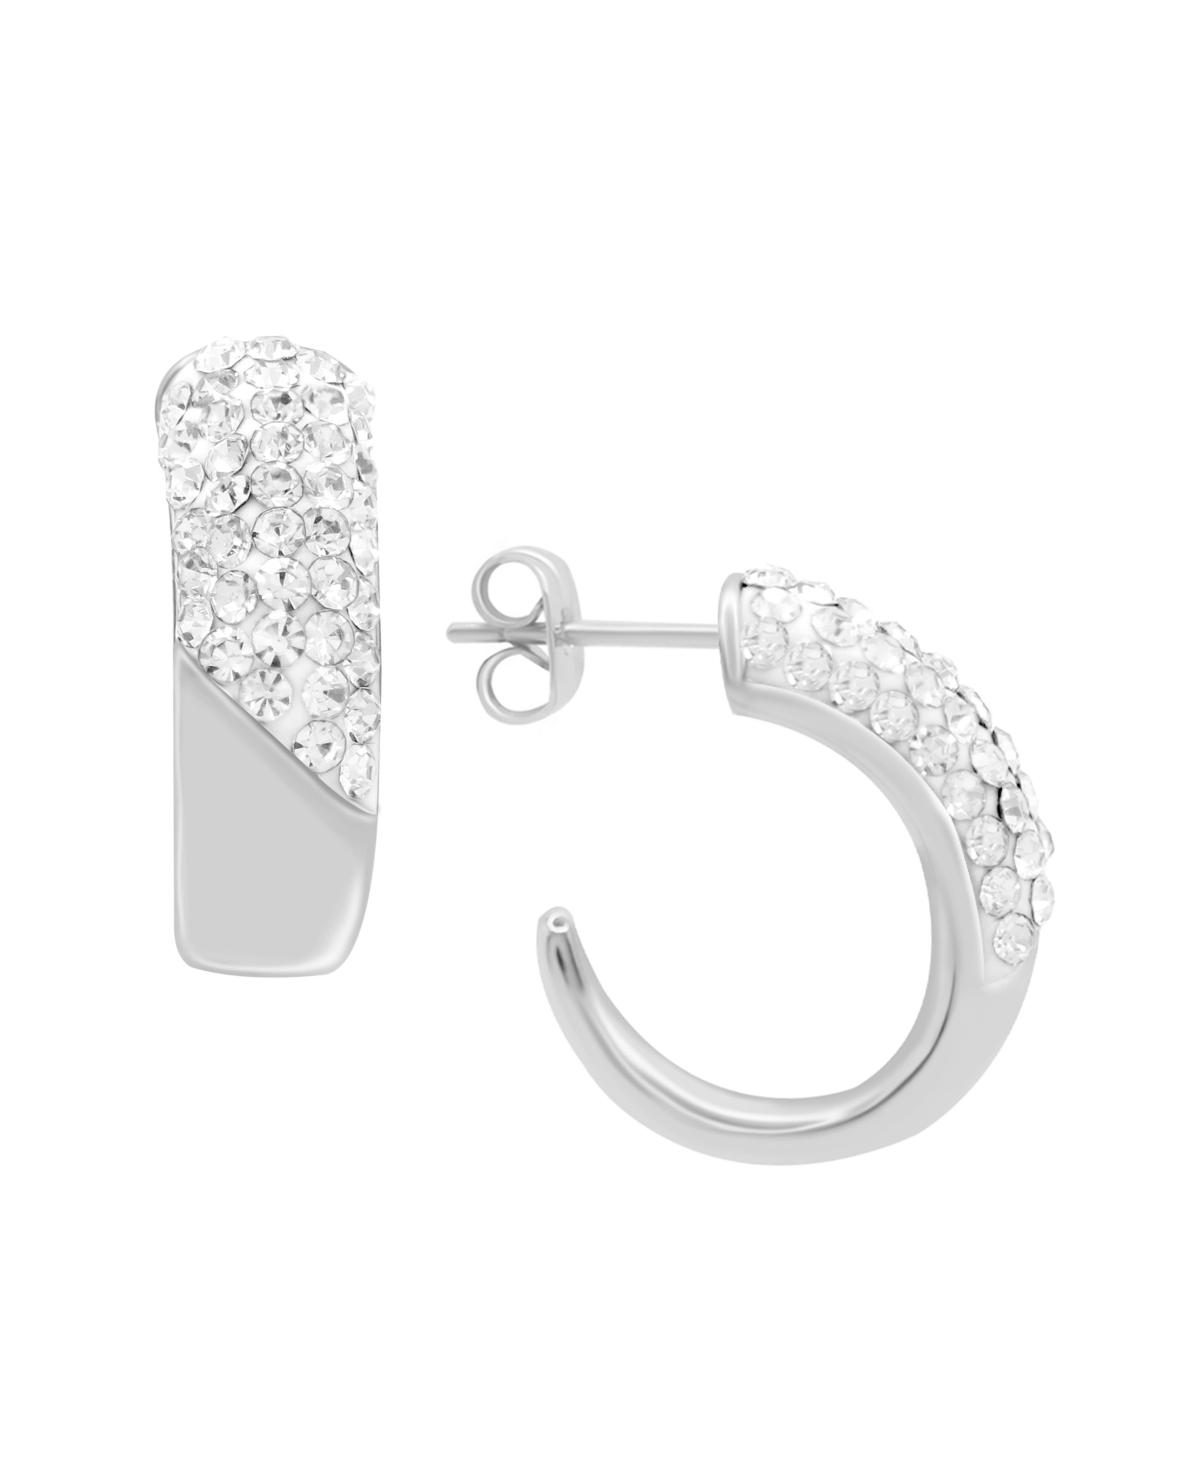 Clear Crystal Pave J Hoop Earring, Gold Plate and Silver Plate - Silver-Tone